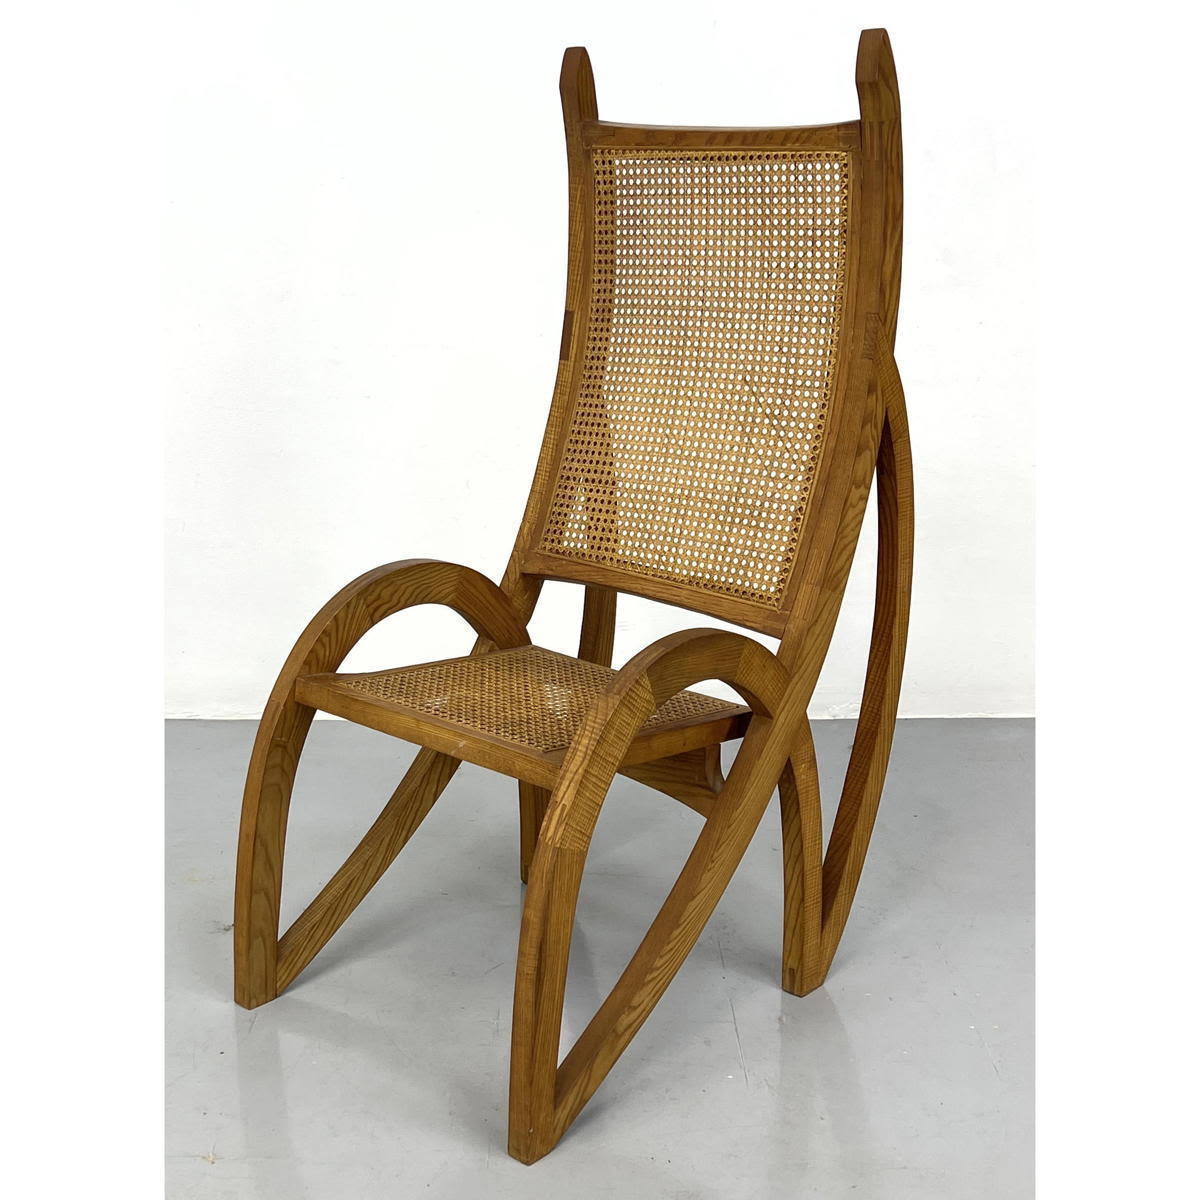 Unusual form Lounge Chair with